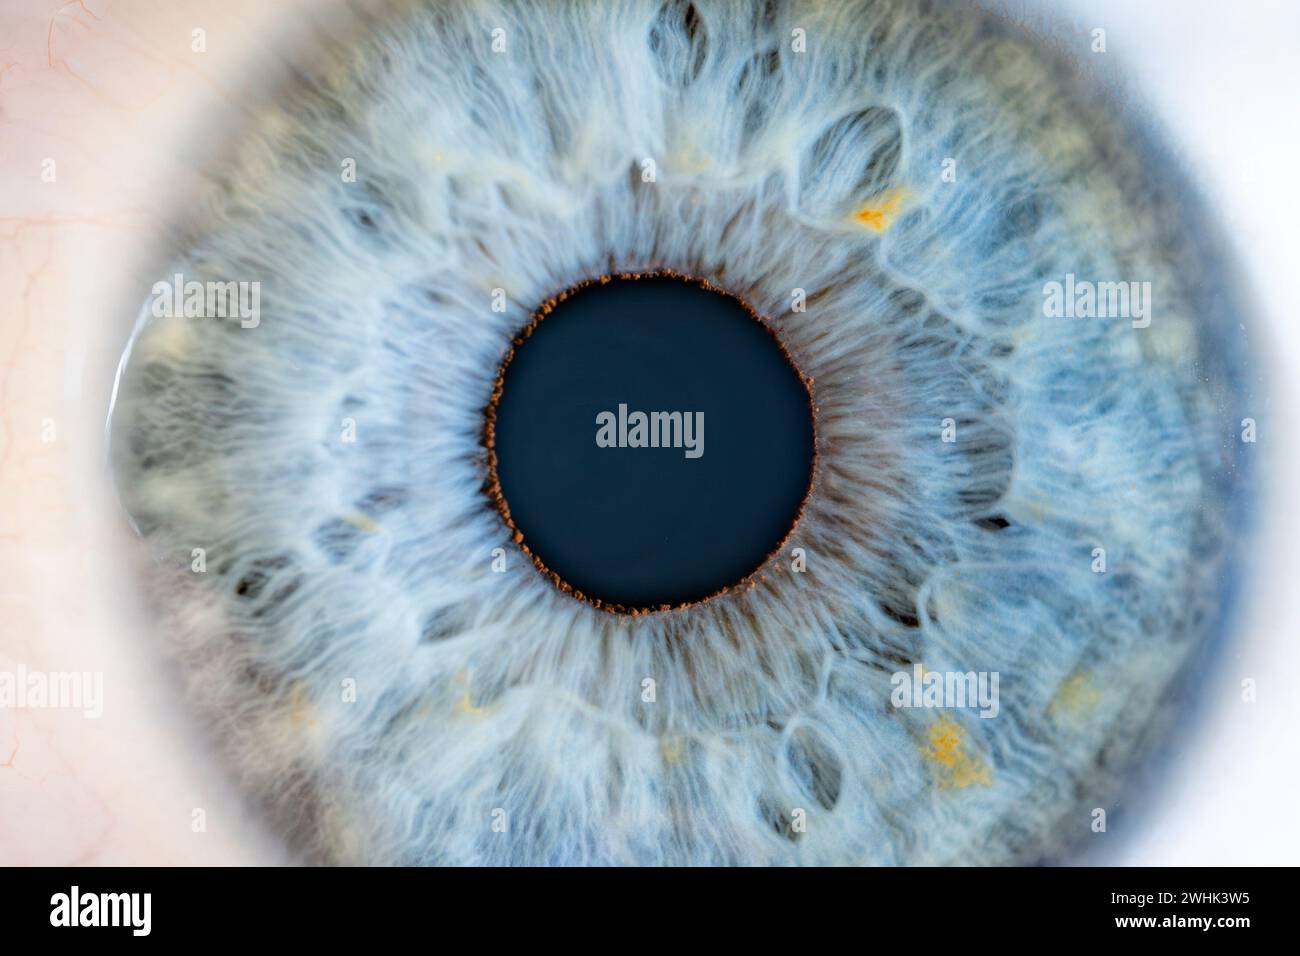 Description: Male Blue Colored Eye With Long Lashes Close Up. Structural Anatomy. Human Iris Super Close Macro Detail. Stock Photo